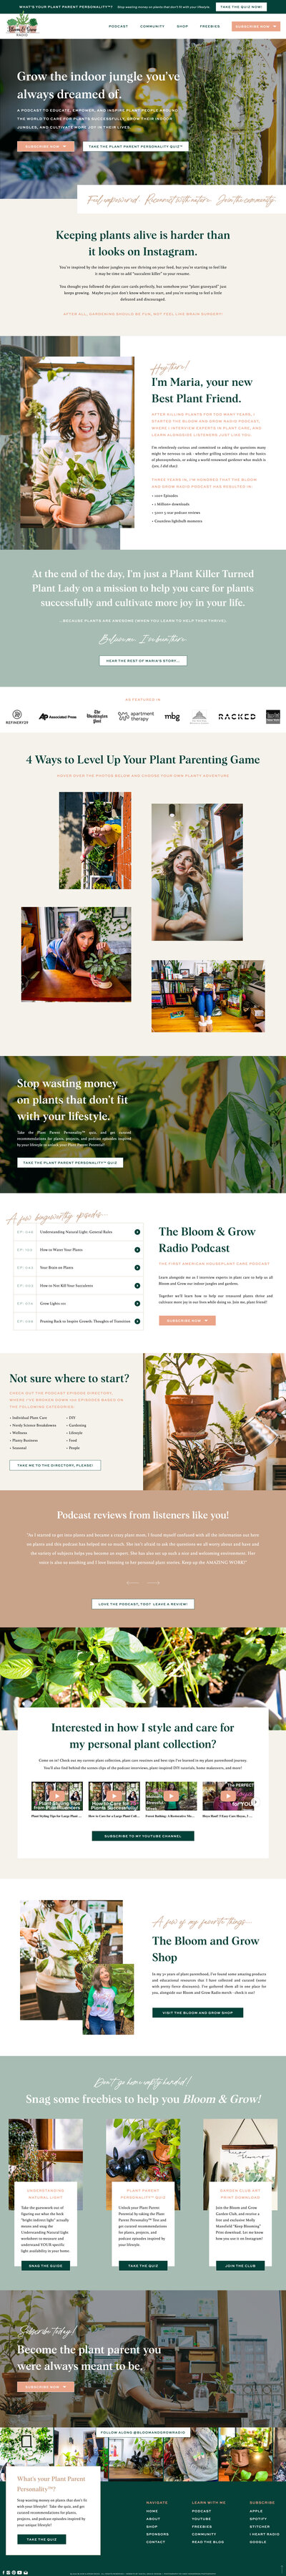 Custom Showit website for Maria Failla, a podcaster, author, & educator in the plant & wellness space